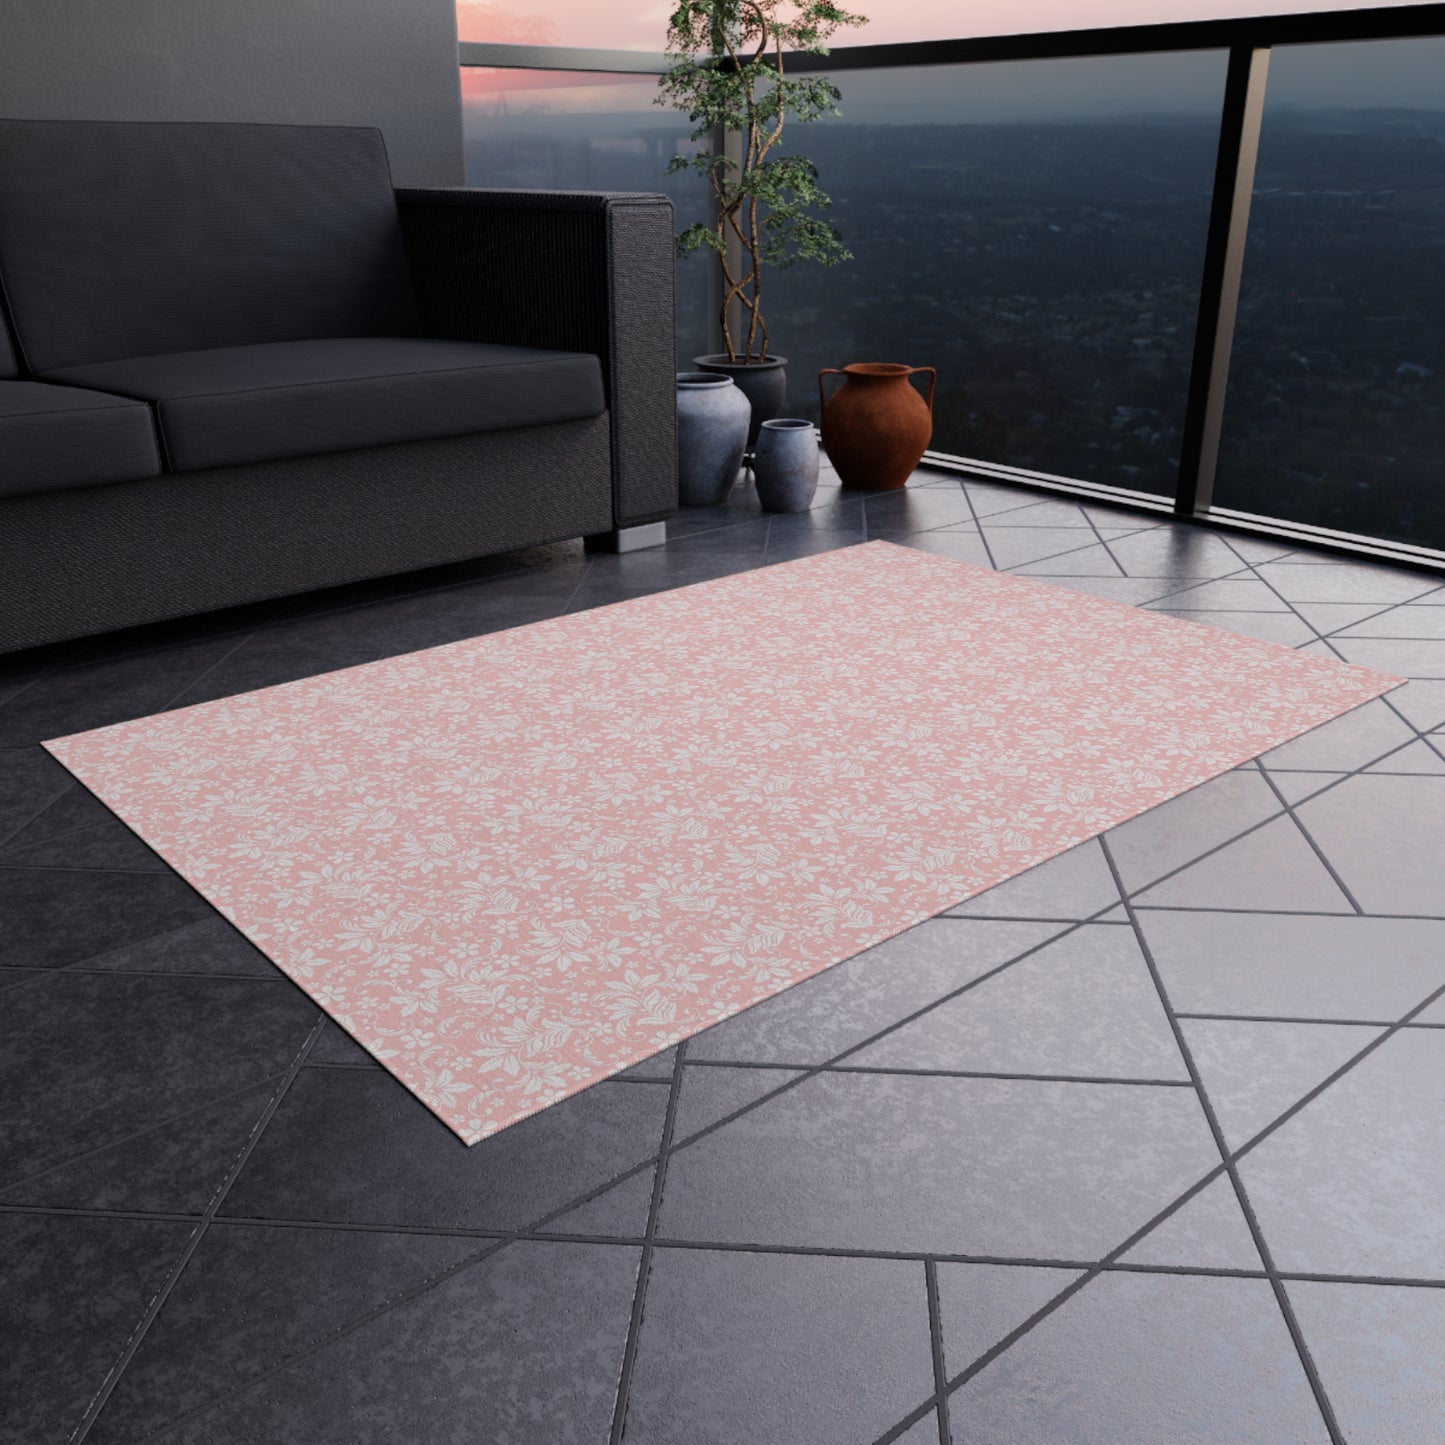 Pink and White Outdoor Area Rug, Floral Flowers Waterproof Carpet Floor Decor Large 2x3 4x6 3x5 5x7 8x10 Patio Deck Small Large Camping Mat